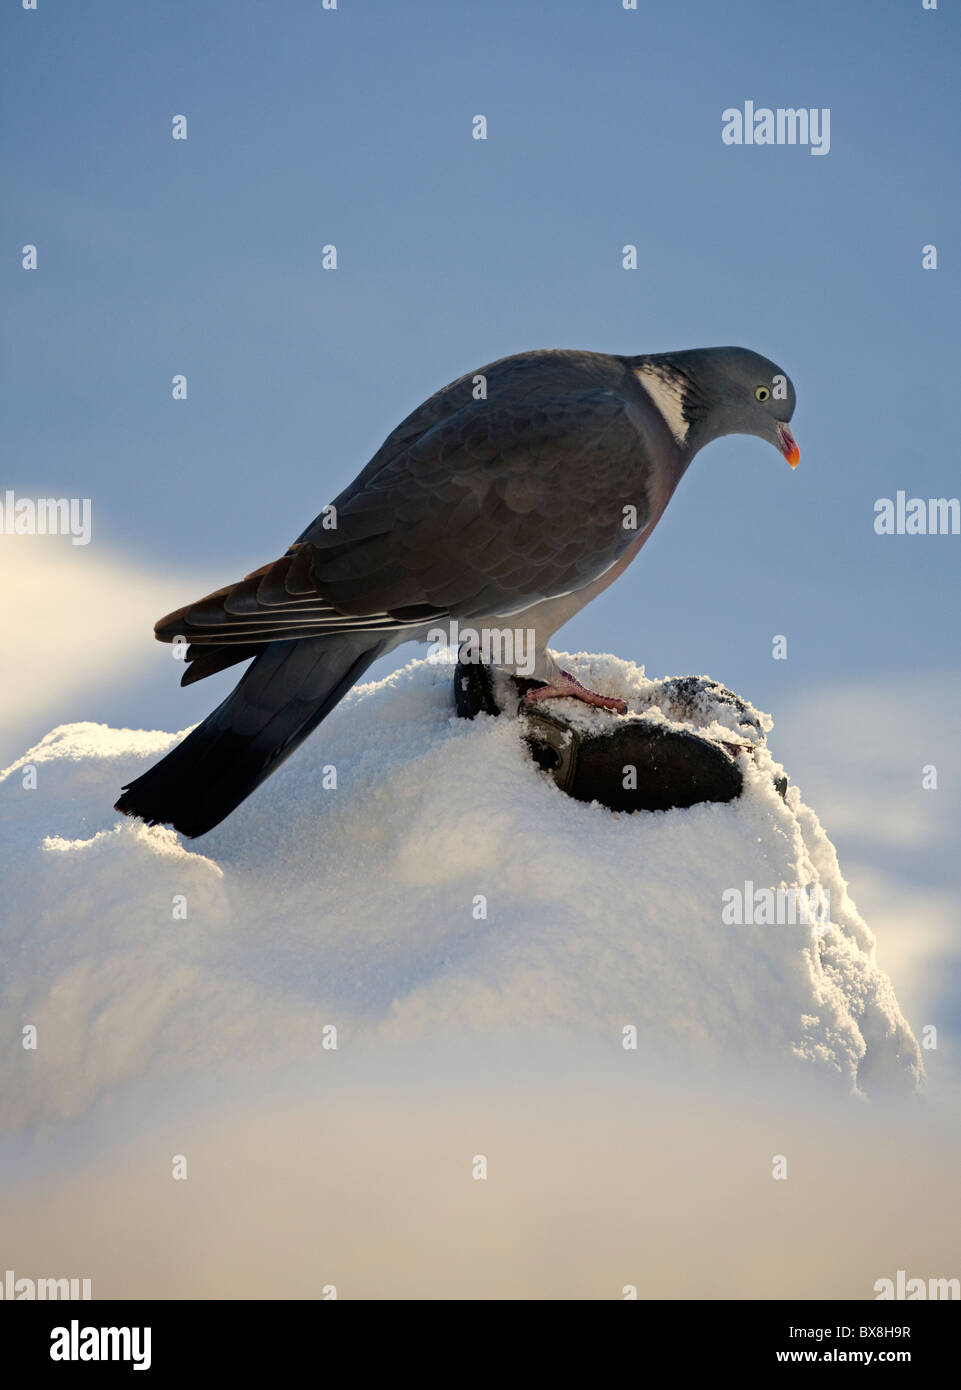 Common Wood pigeon perched on old boot covered in snow Stock Photo